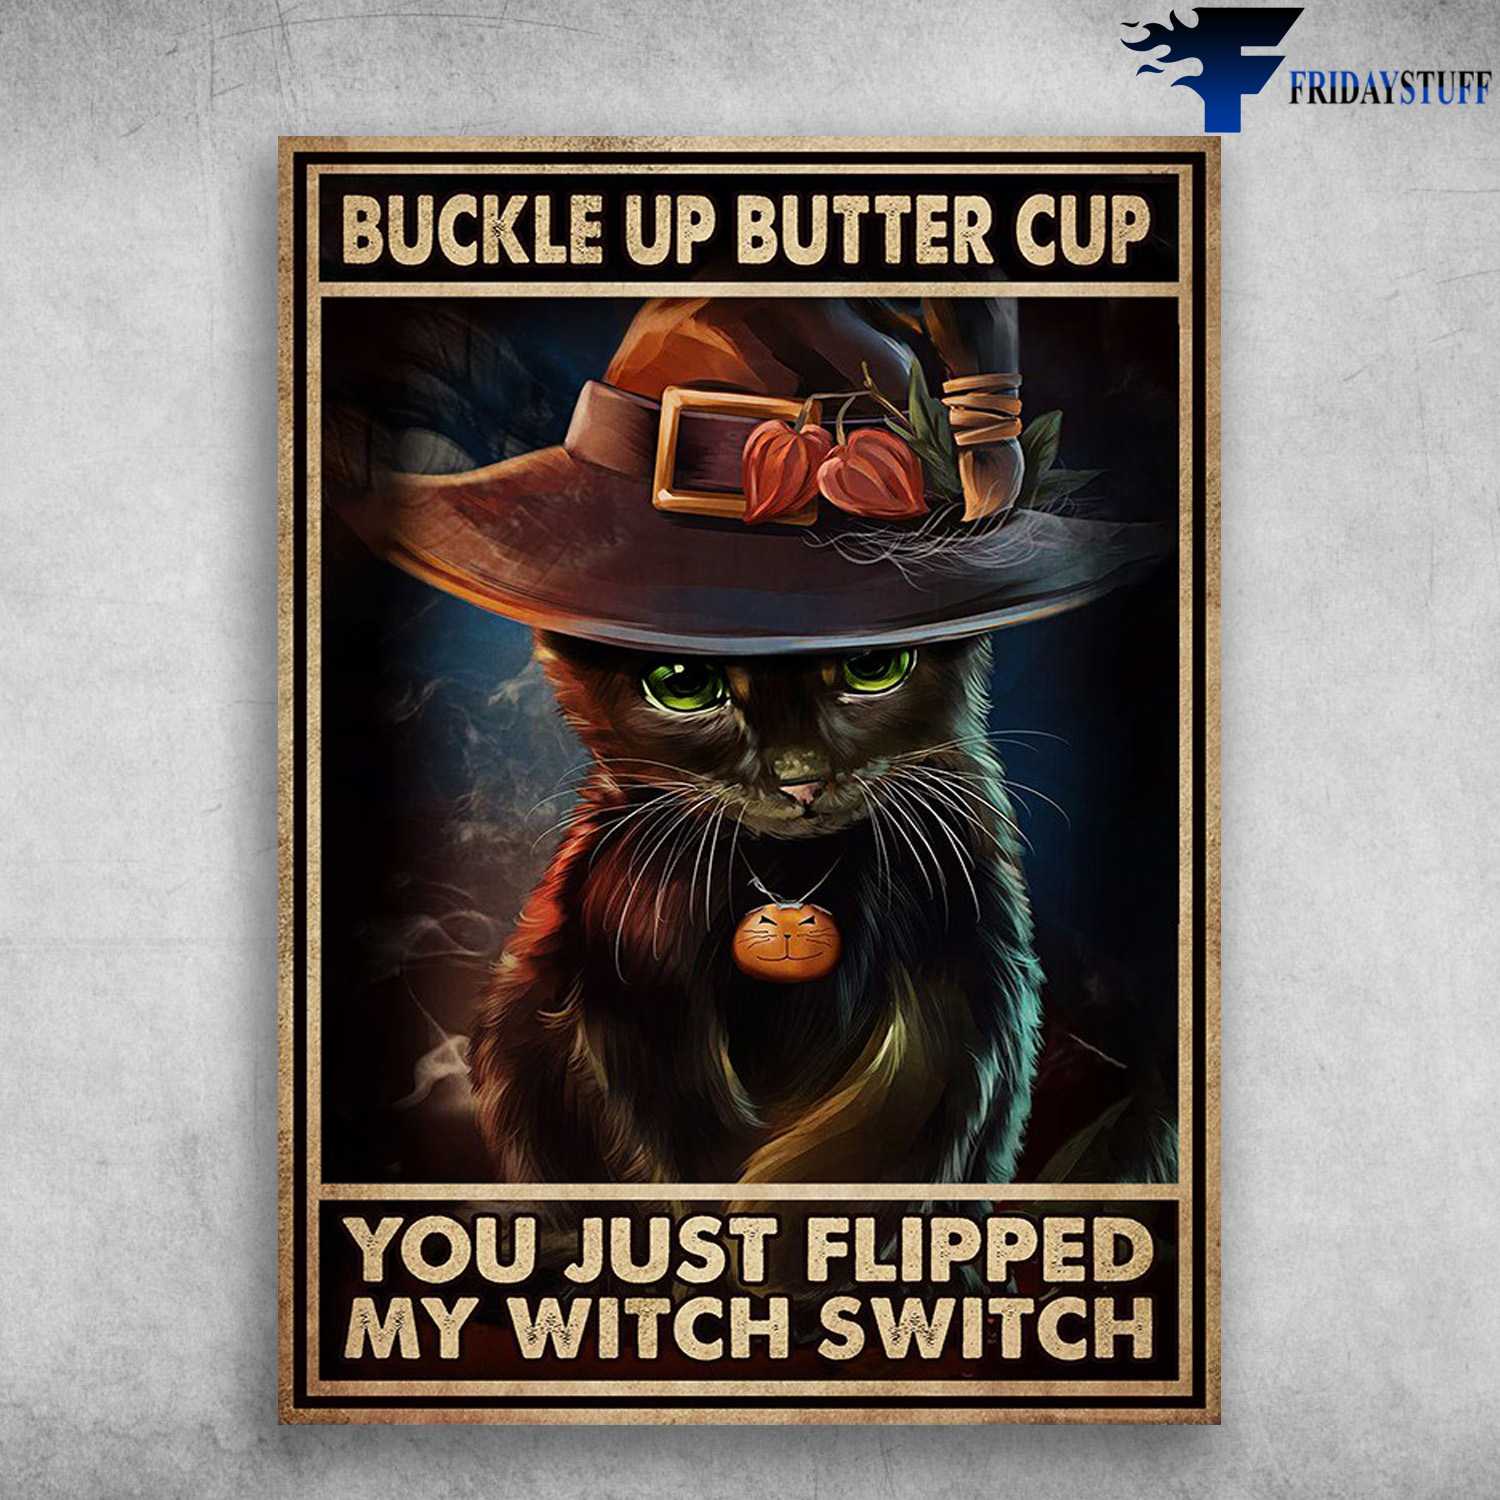 Black Cat Witch - Buckle Up, Butter Cup, You Just Flipped, My Witch Switch, Halloweern Day